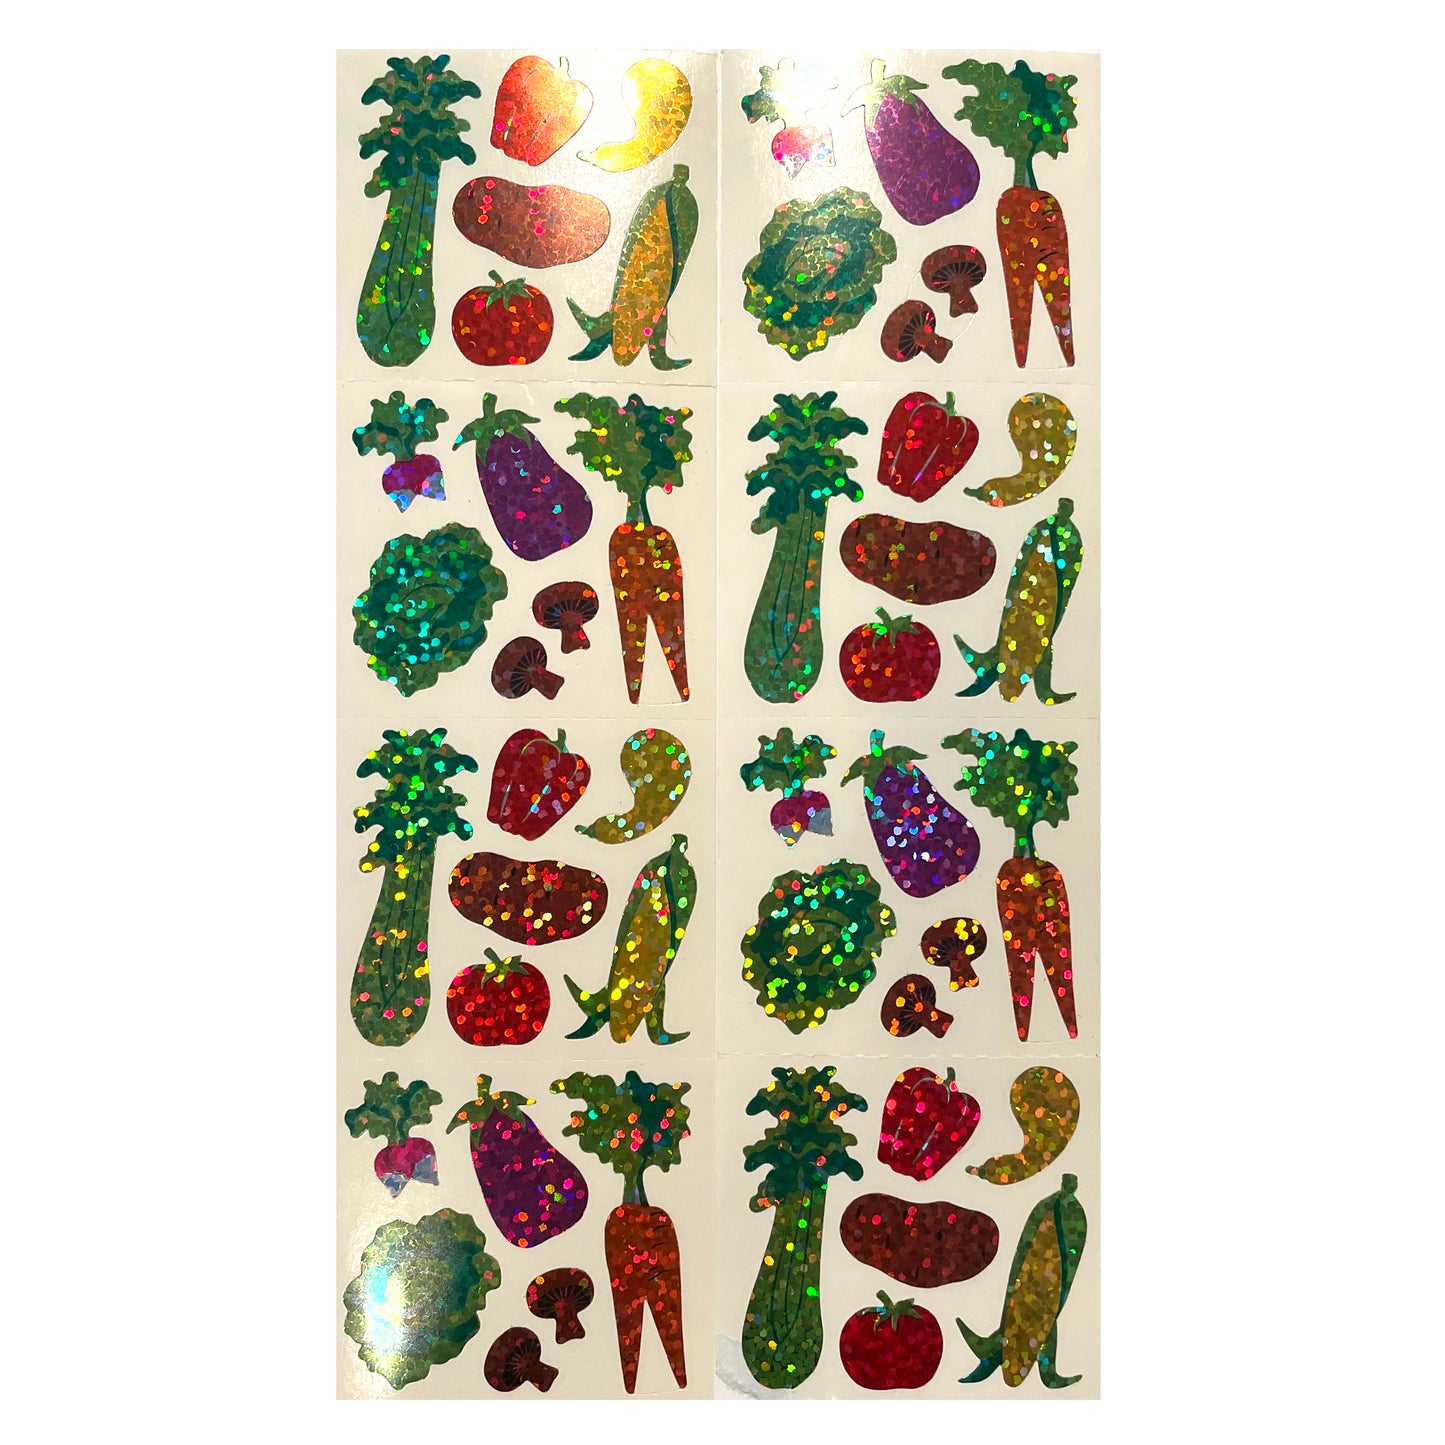 HAMBLY: Vegetables glitter stickers